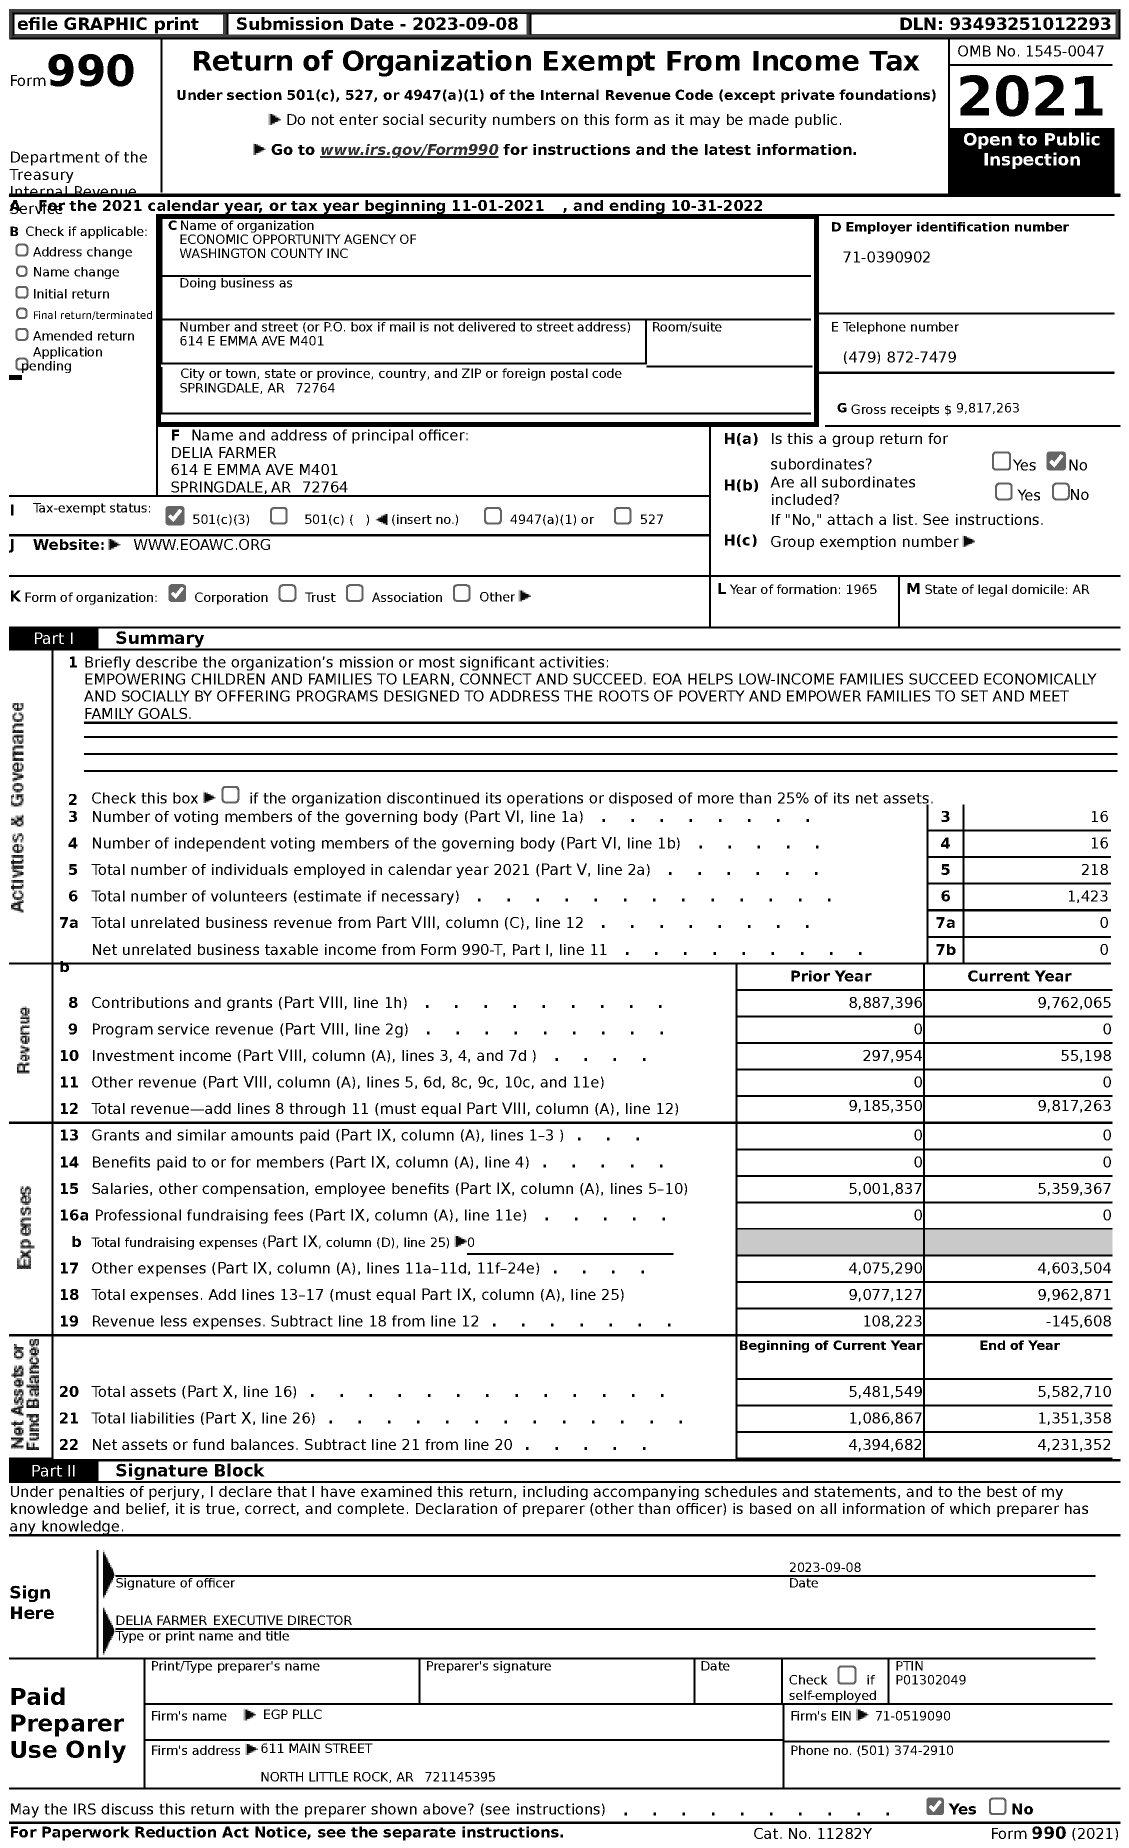 Image of first page of 2021 Form 990 for Economic Opportunity Agency of Washington County